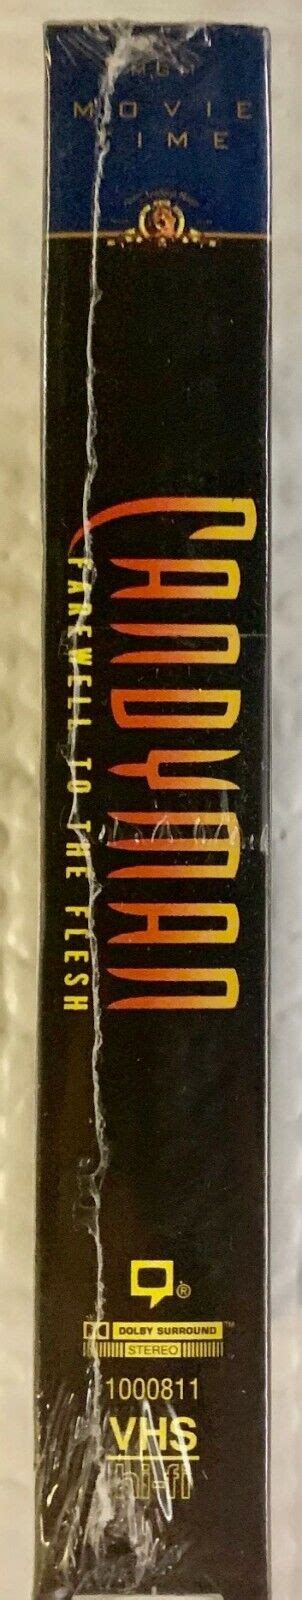 Candyman Farewell To The Flesh Vhs 1995 Rare Oop New Factory Sealed